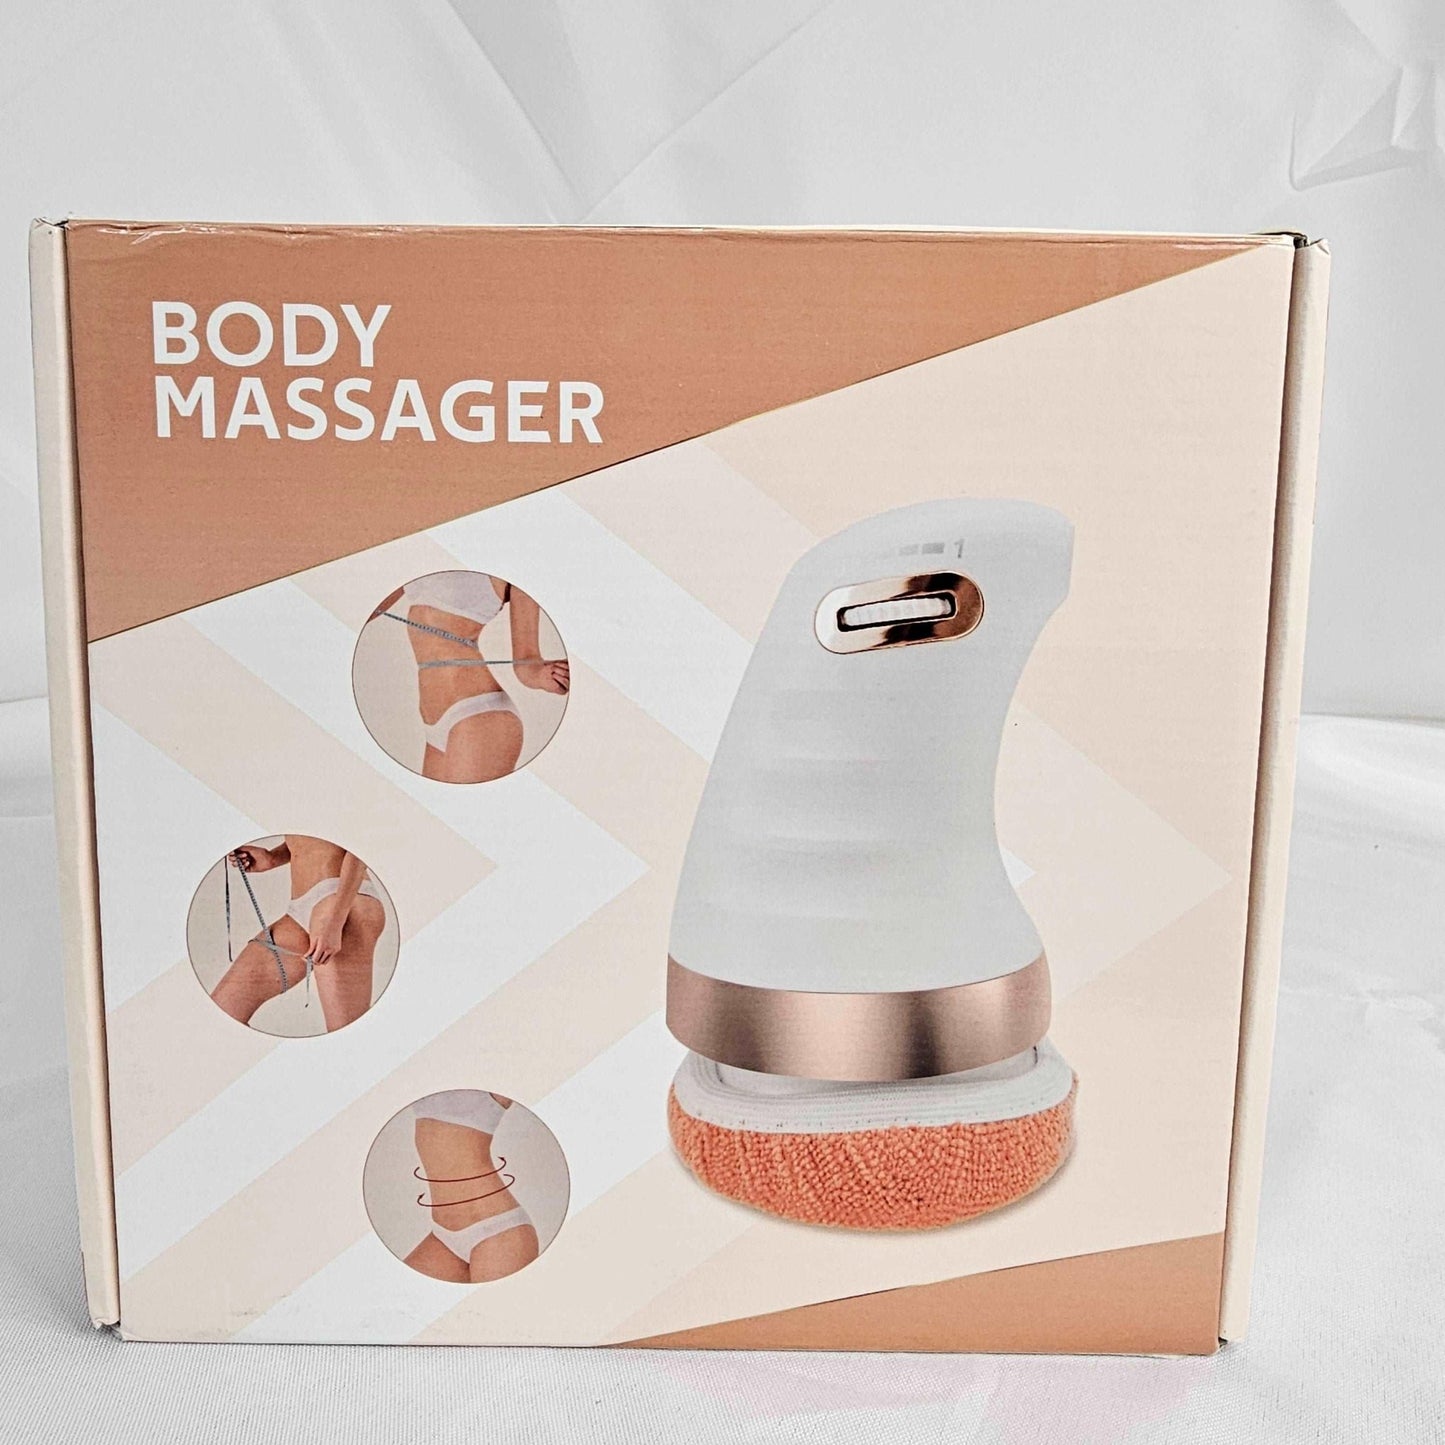 Ergonomic Body Massager with Adjustable Intensity - Pain Relief & Relaxation - DQ Distribution